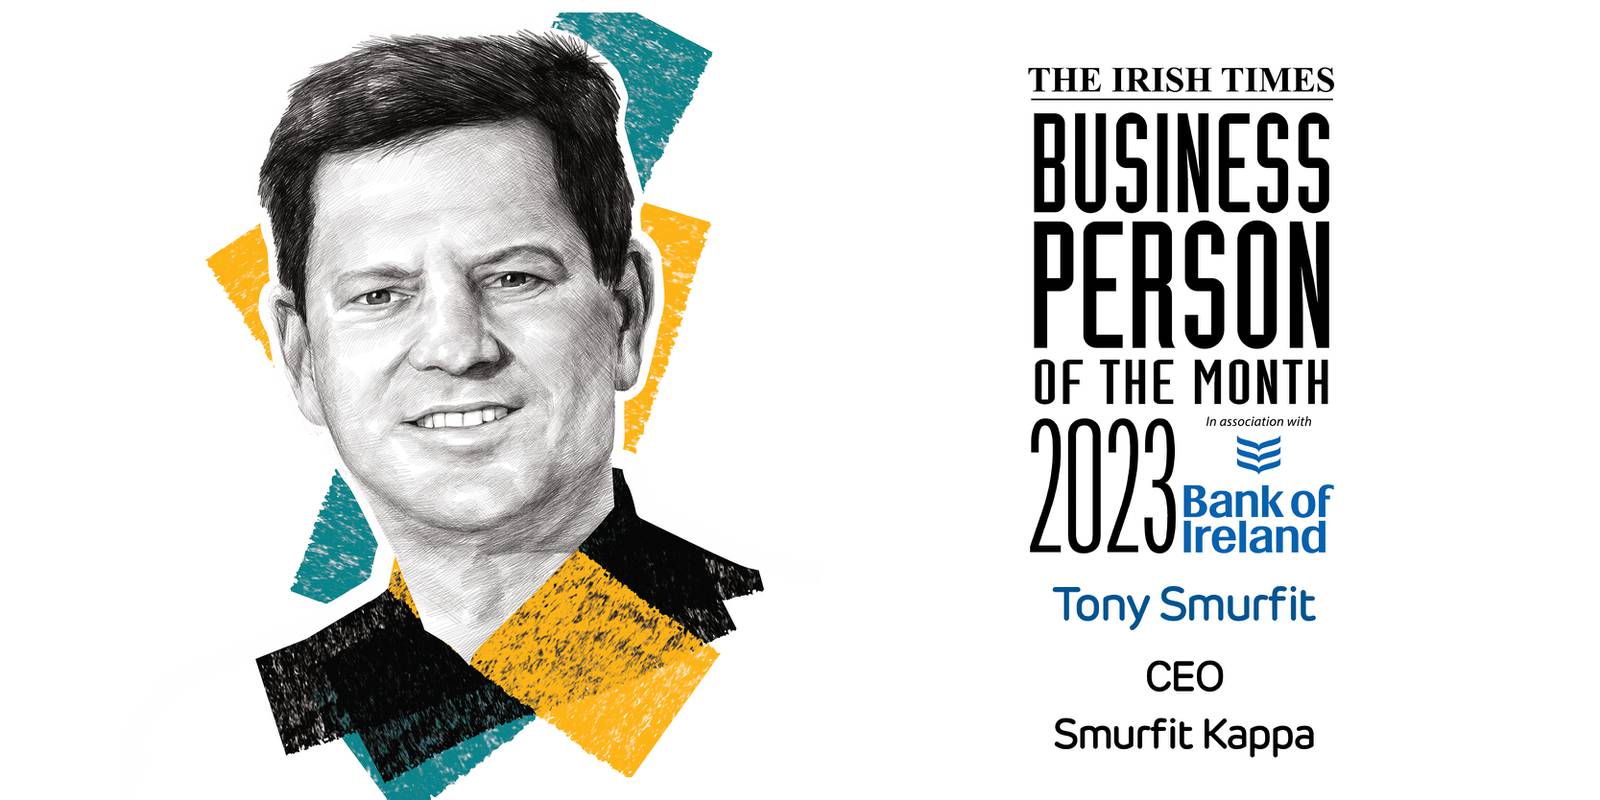 Irish Times Business Person of the Month for September 2023, Tony Smurfit